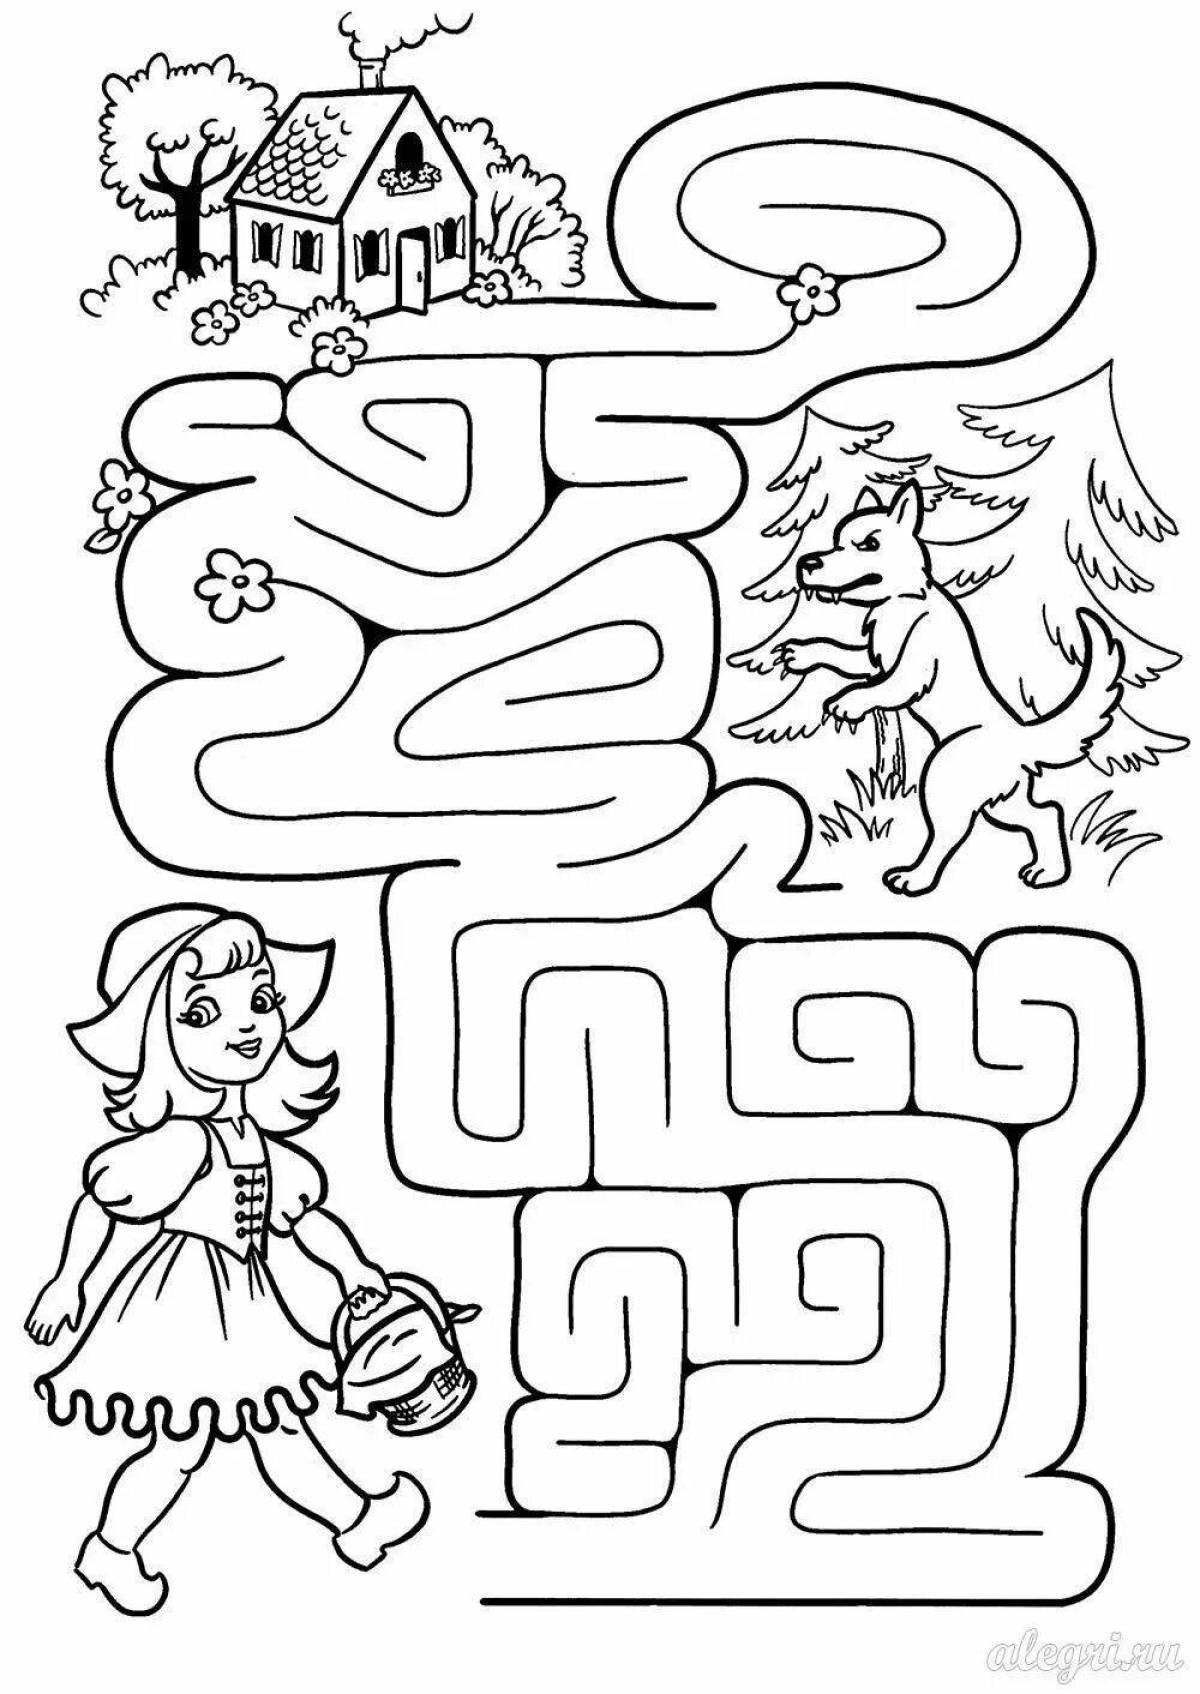 Magic maze coloring book for children 7 years old